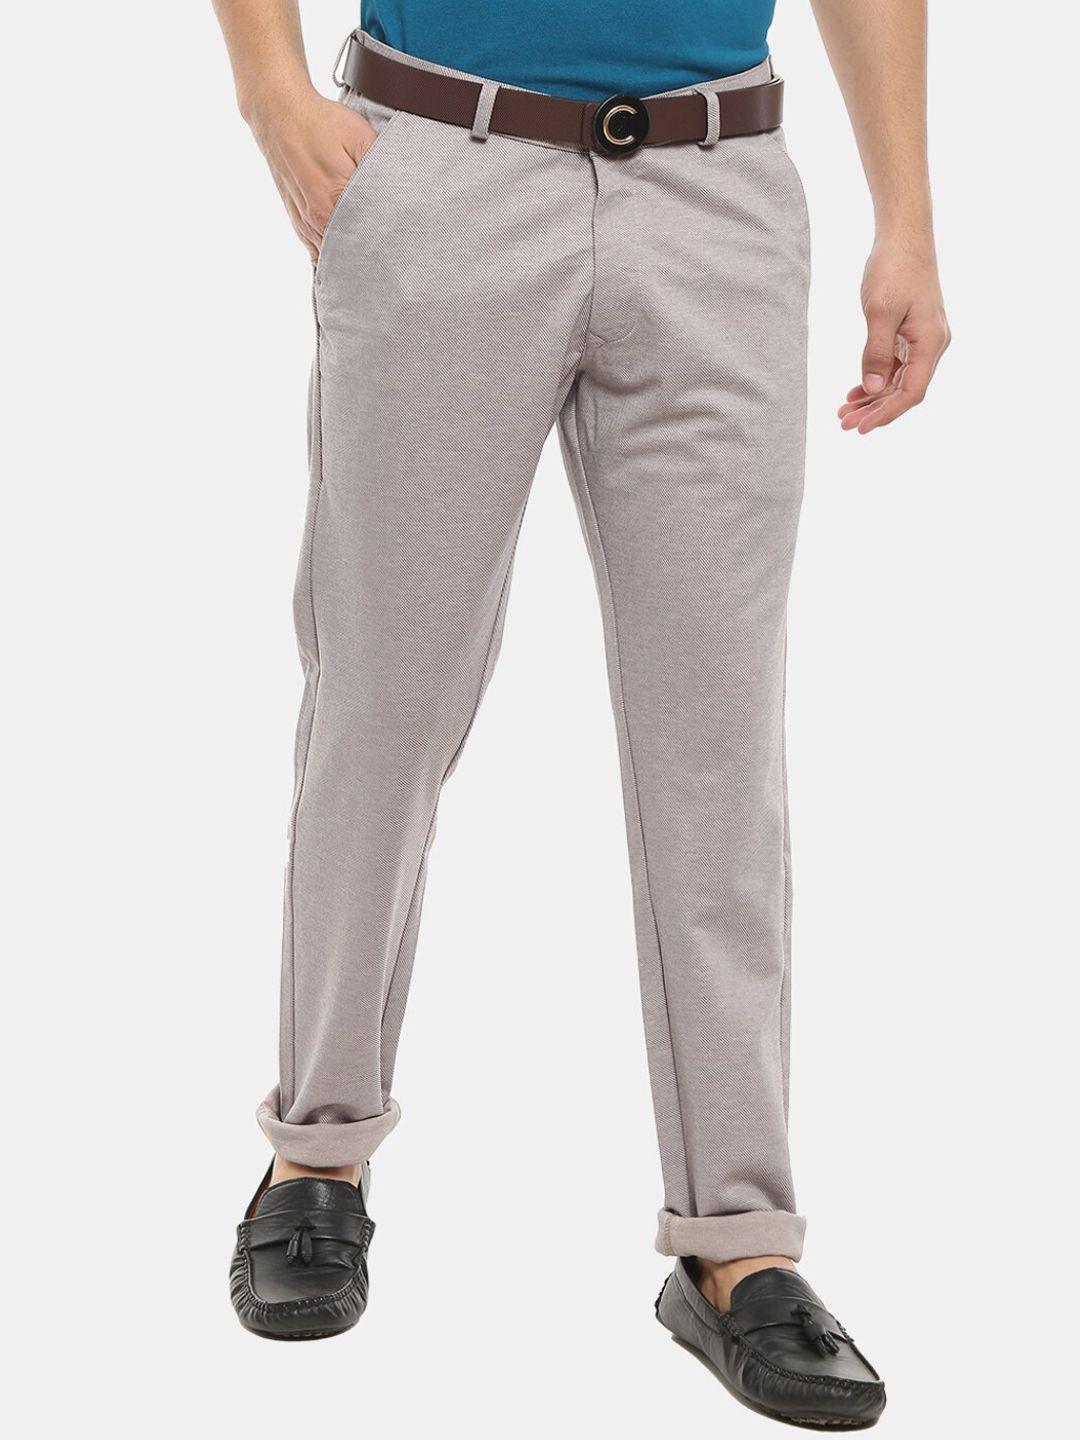 v-mart men grey easy wash chinos trousers